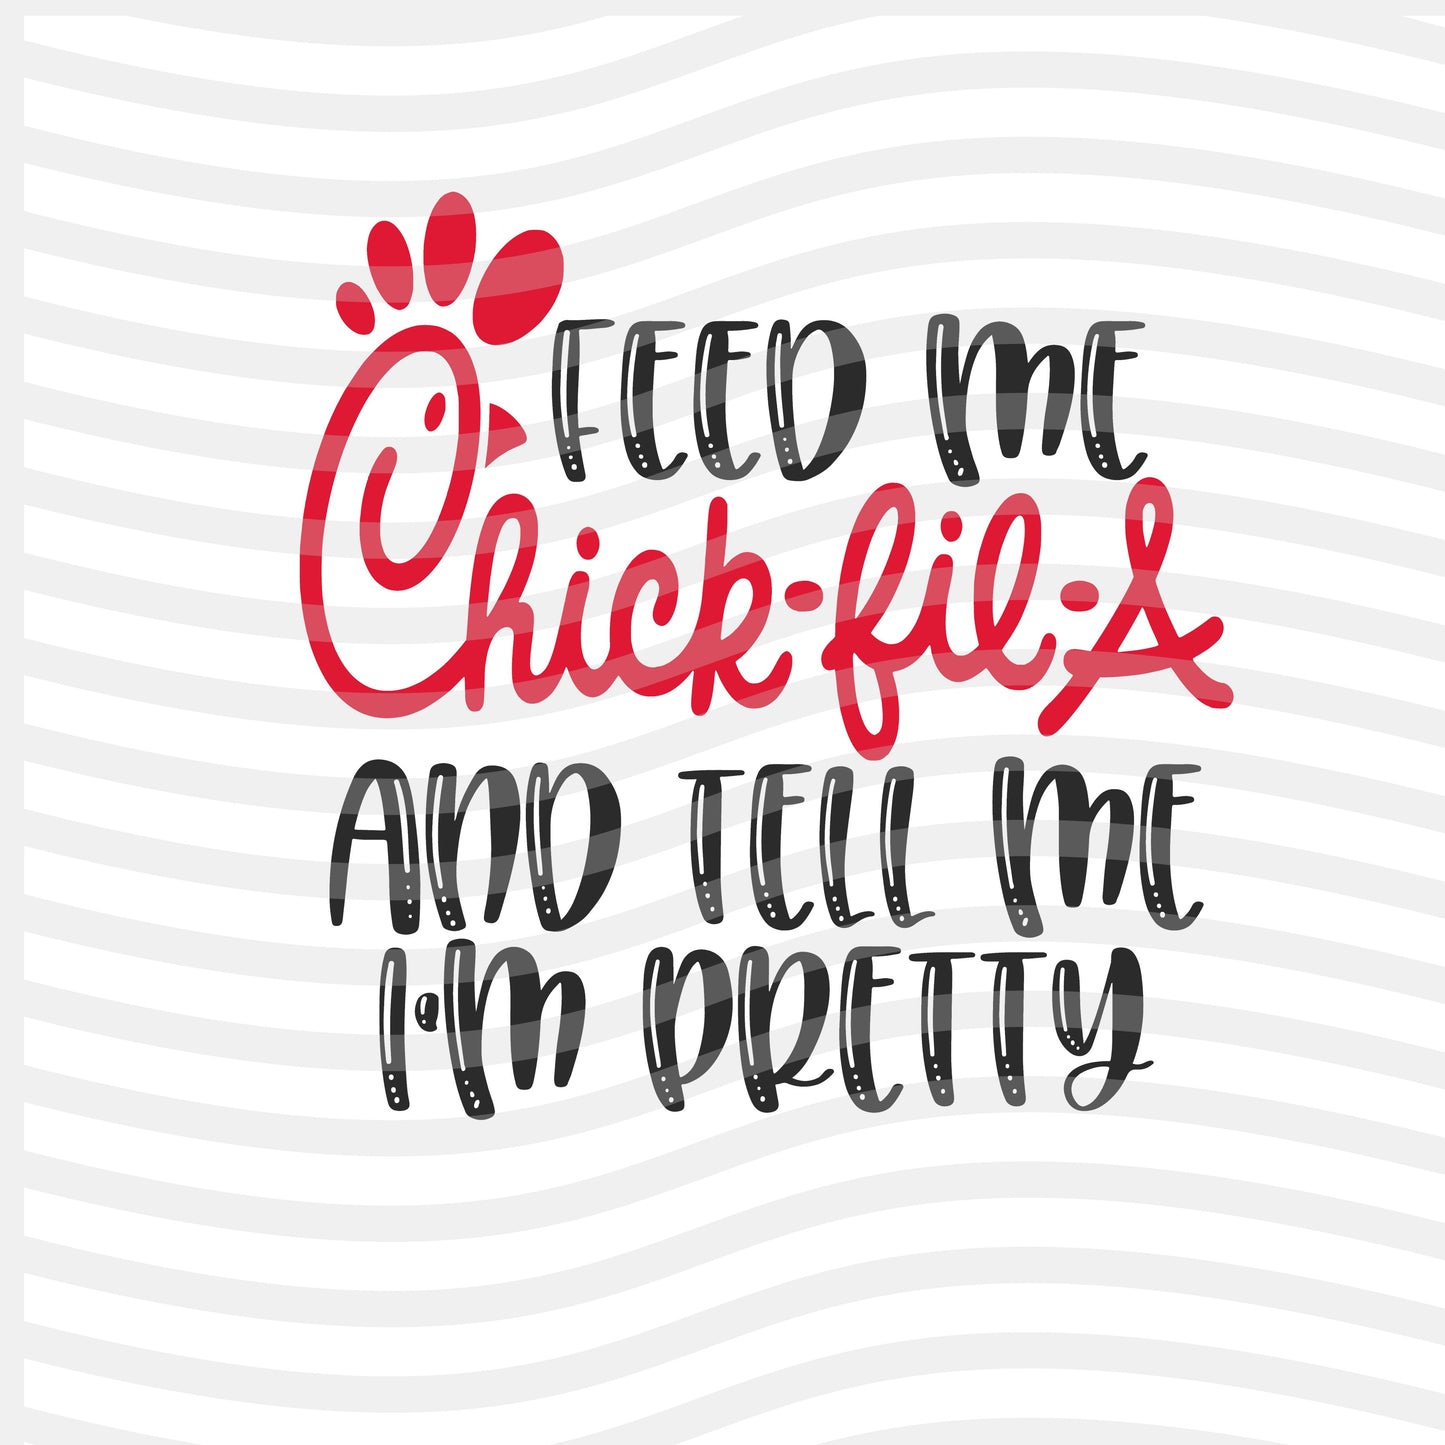 Feed me Chick-fil-A